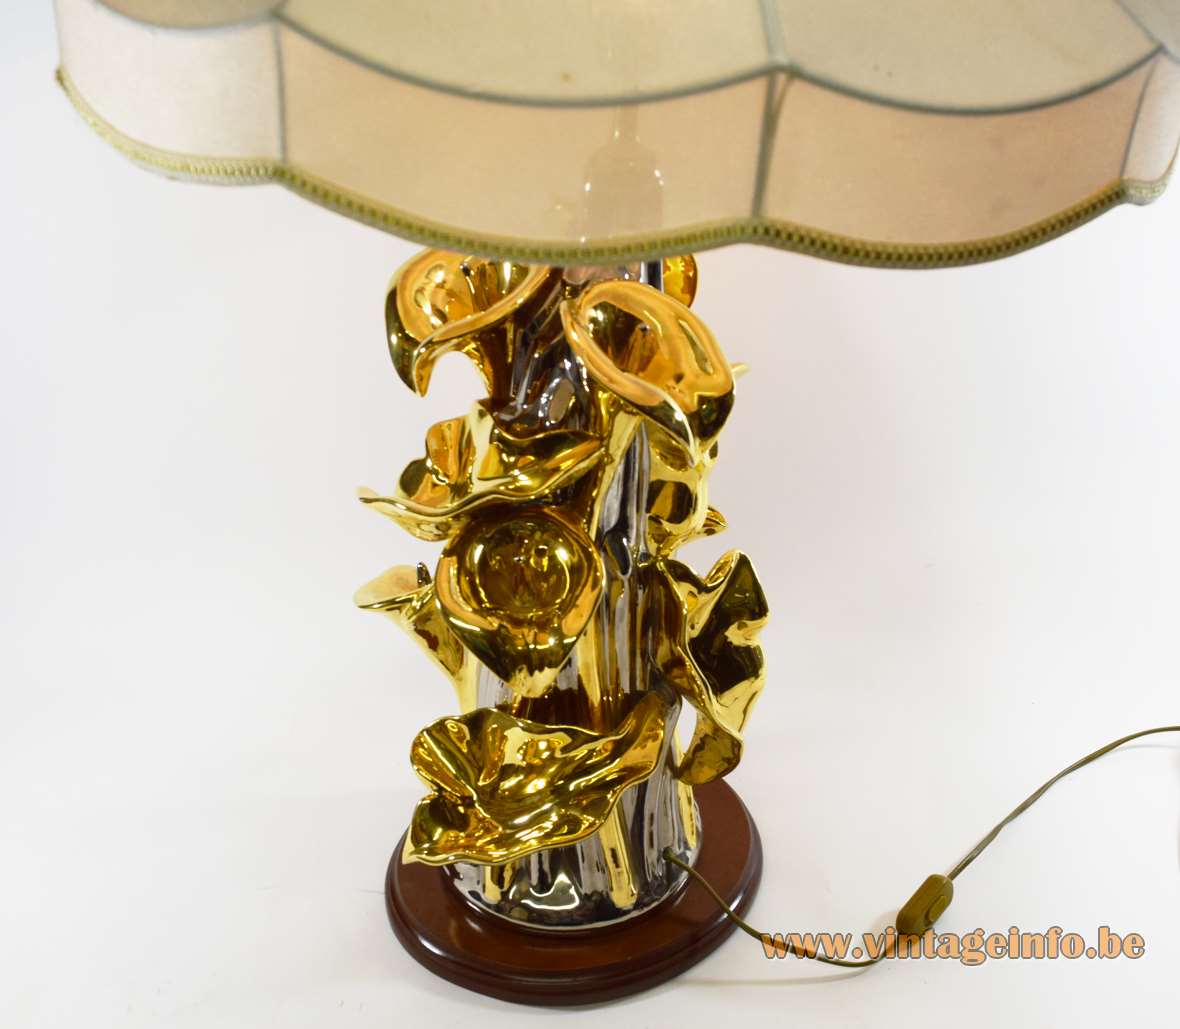 Zaccagnini Arum table lamp silver & gold painted ceramic flowers fabric lampshade Florence Italy Porcellane San Marco